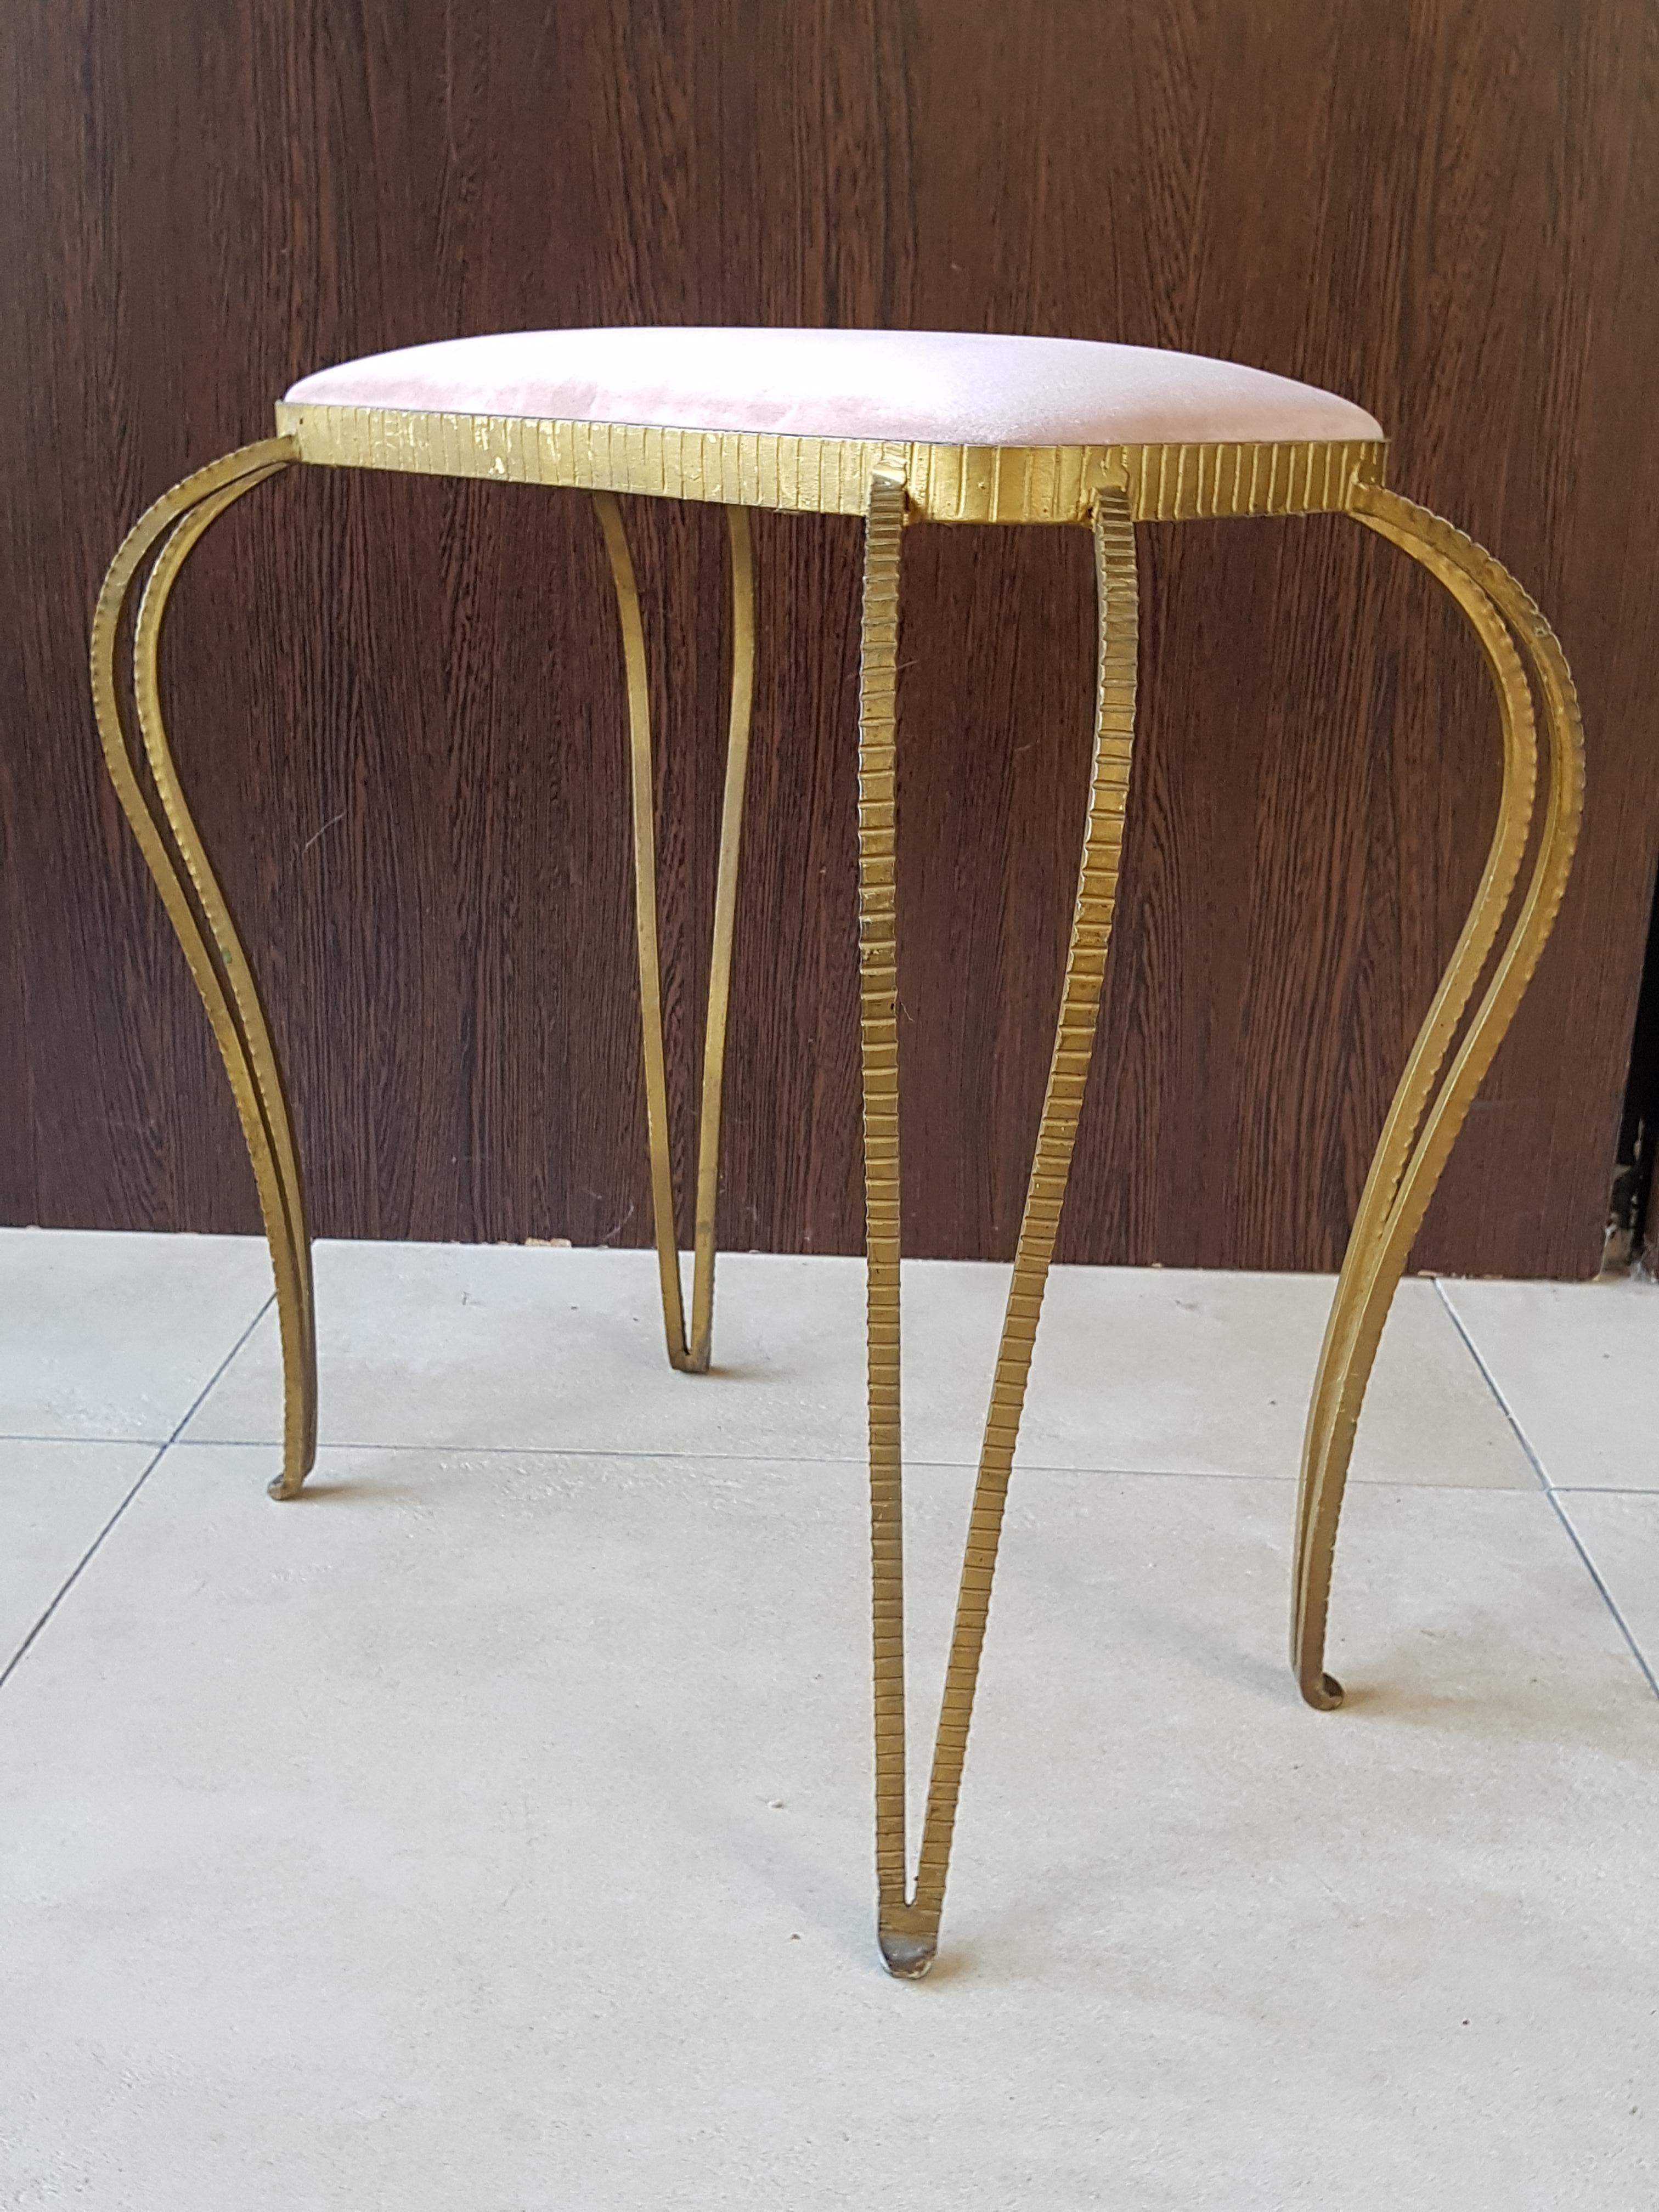 Art Deco midcentury stool wrought iron by Pier Luigi Colli, Italy, 1940s. Iron, gold color patina. New upholstered with old-pink suede. Solid and stable.

Entirely hand-molded, as if they were sculptures, amazing work of great